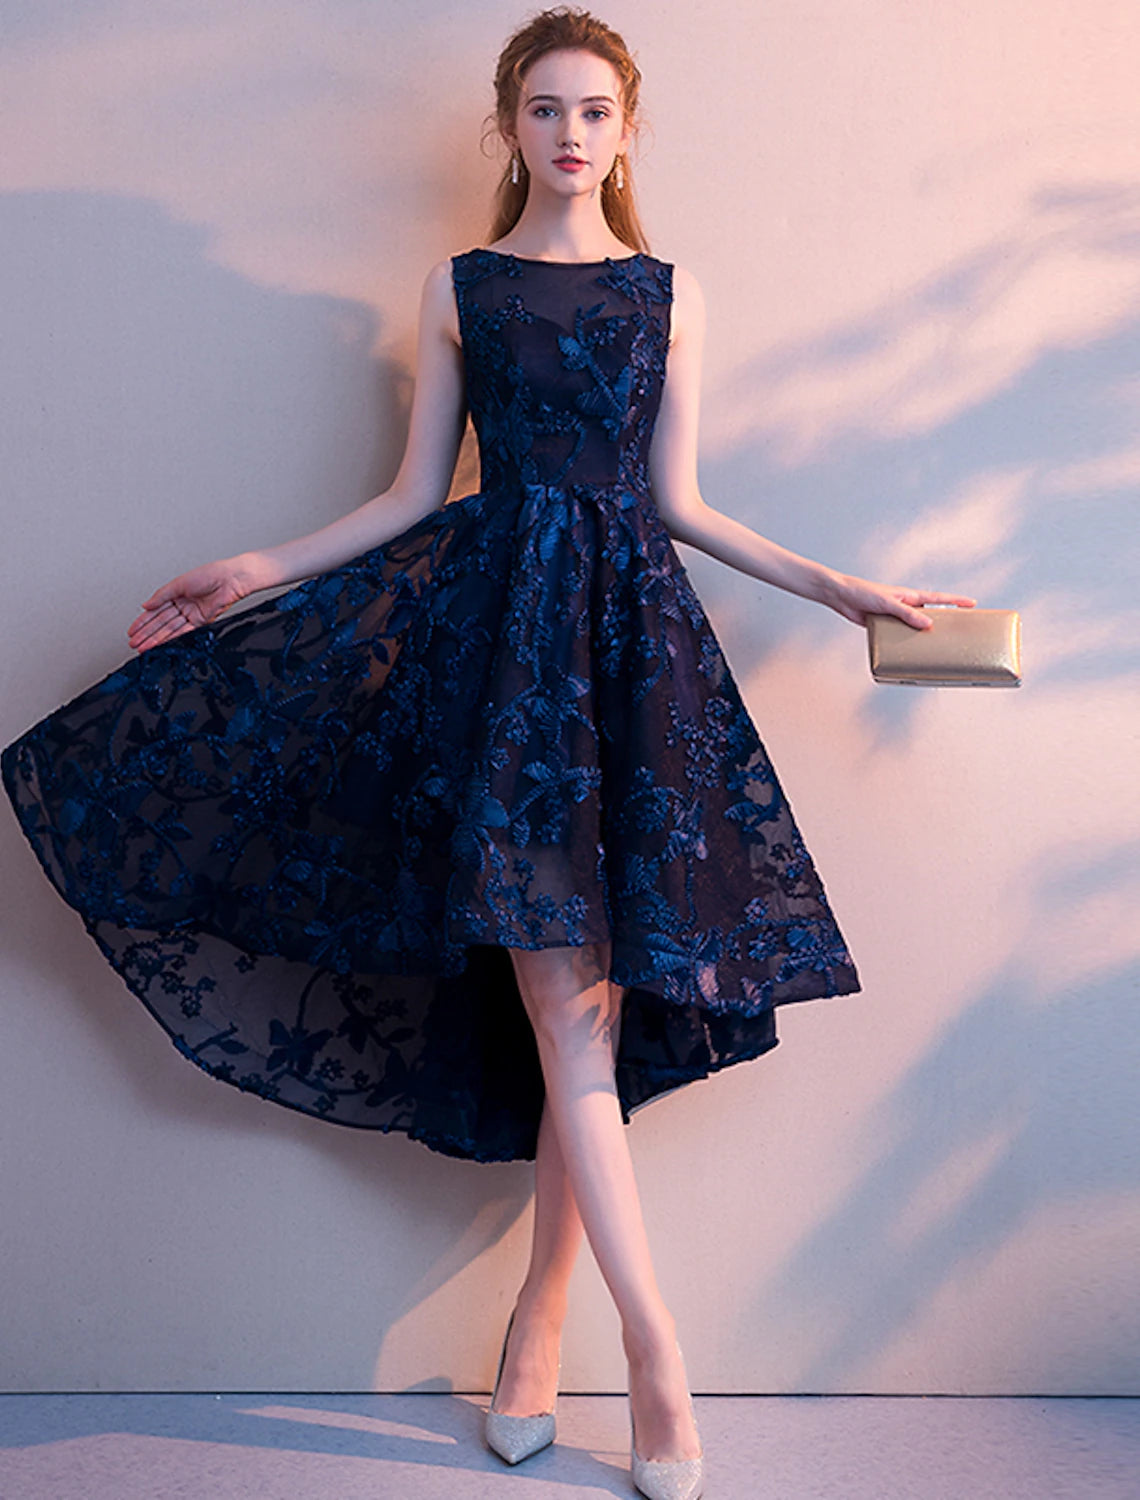 A-Line Cocktail Dresses Minimalist Dress Homecoming Asymmetrical Sleeveless Jewel Neck Tulle with Pleats Pattern / Print